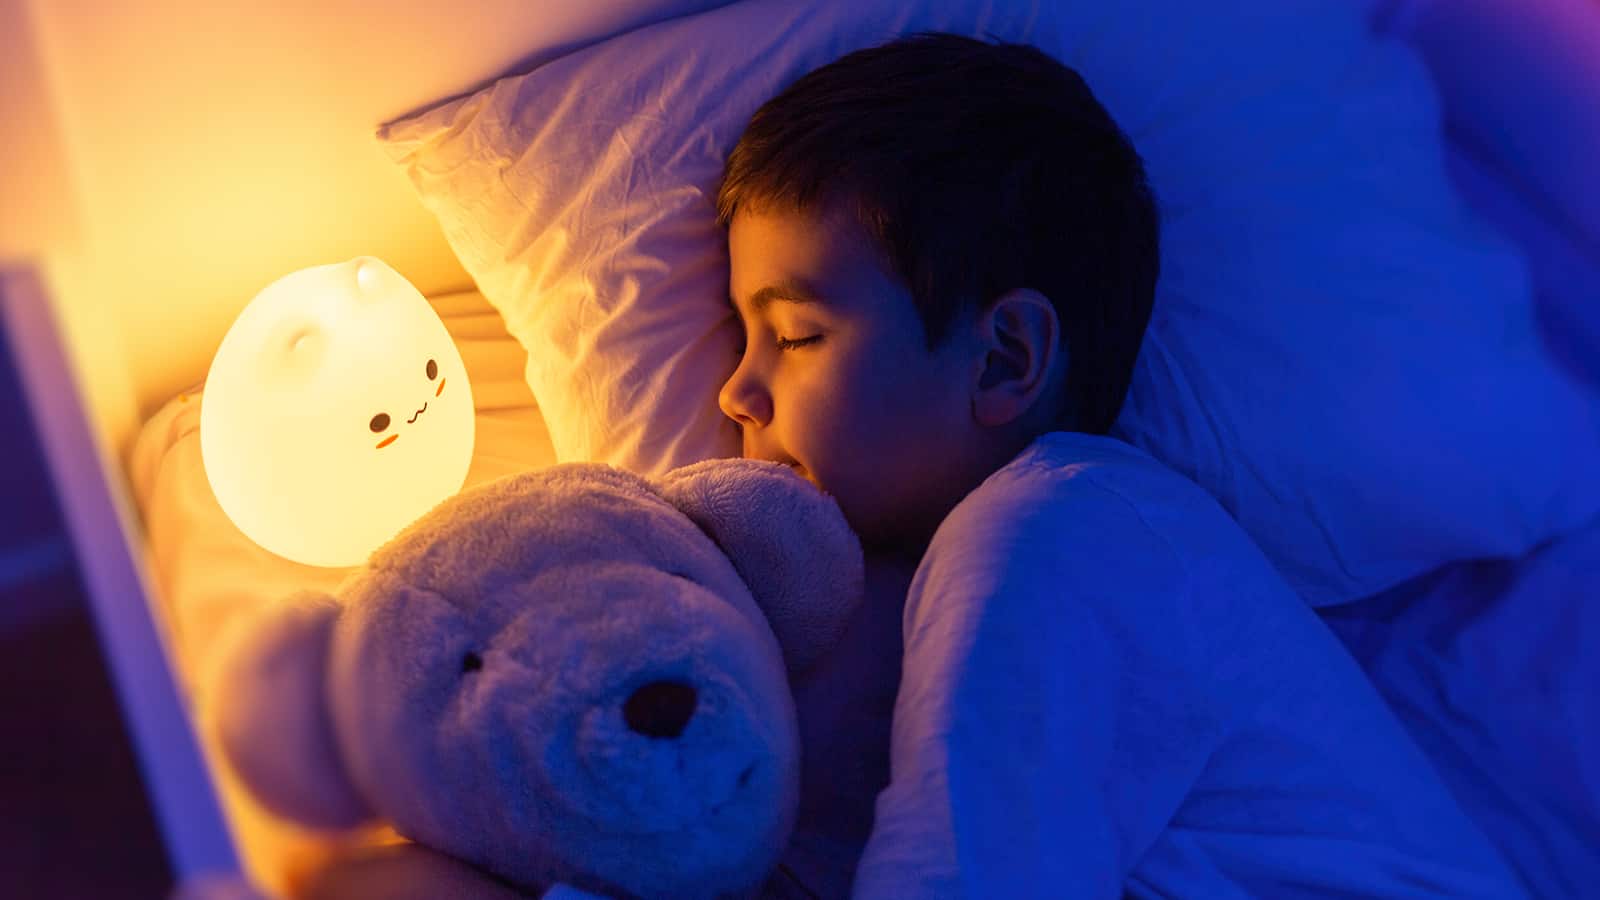 Researchers Reveal Why A Night Light May Disrupt Sleep in Preschoolers